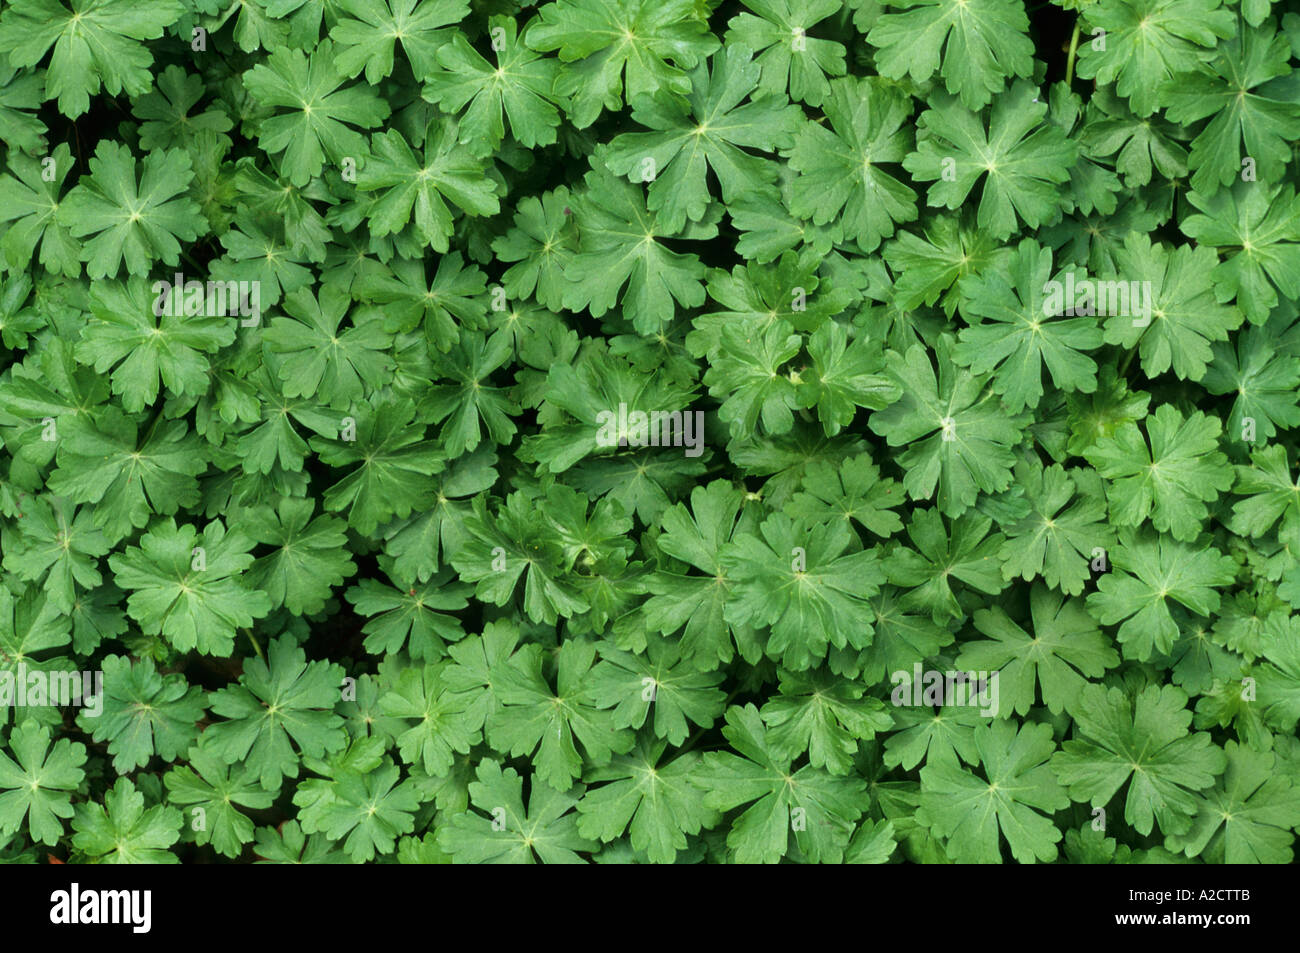 Hardy Geranium Leaves Cultivated Plant Stock Photo